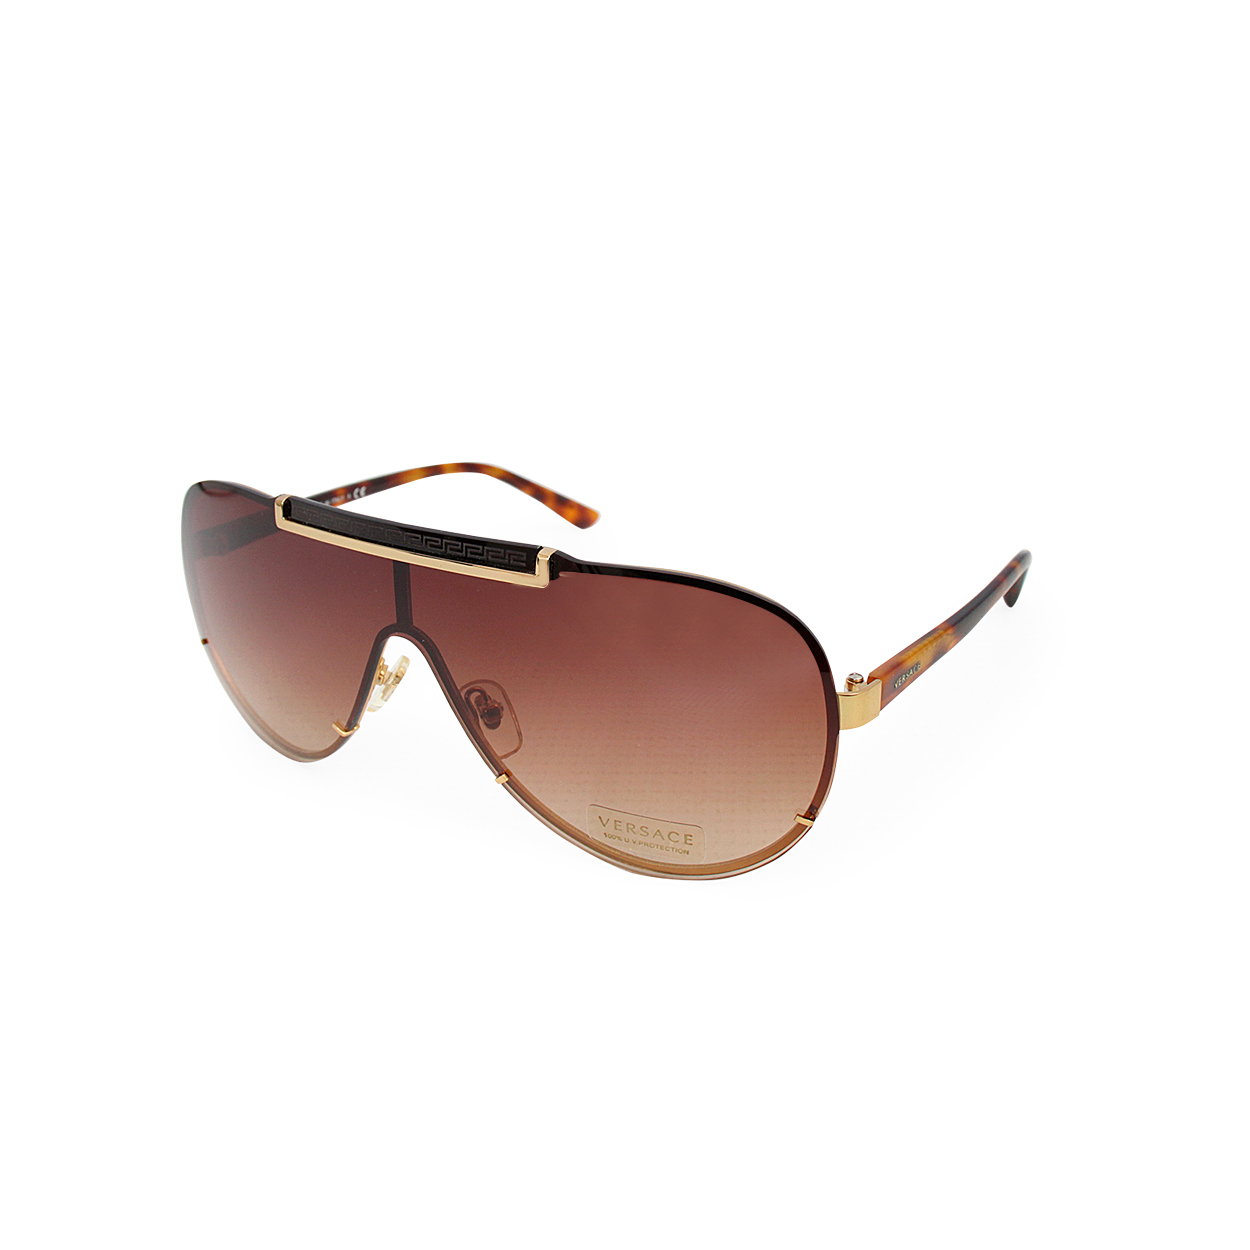 VERSACE Sunglasses MOD 2165 Brown | Luxity